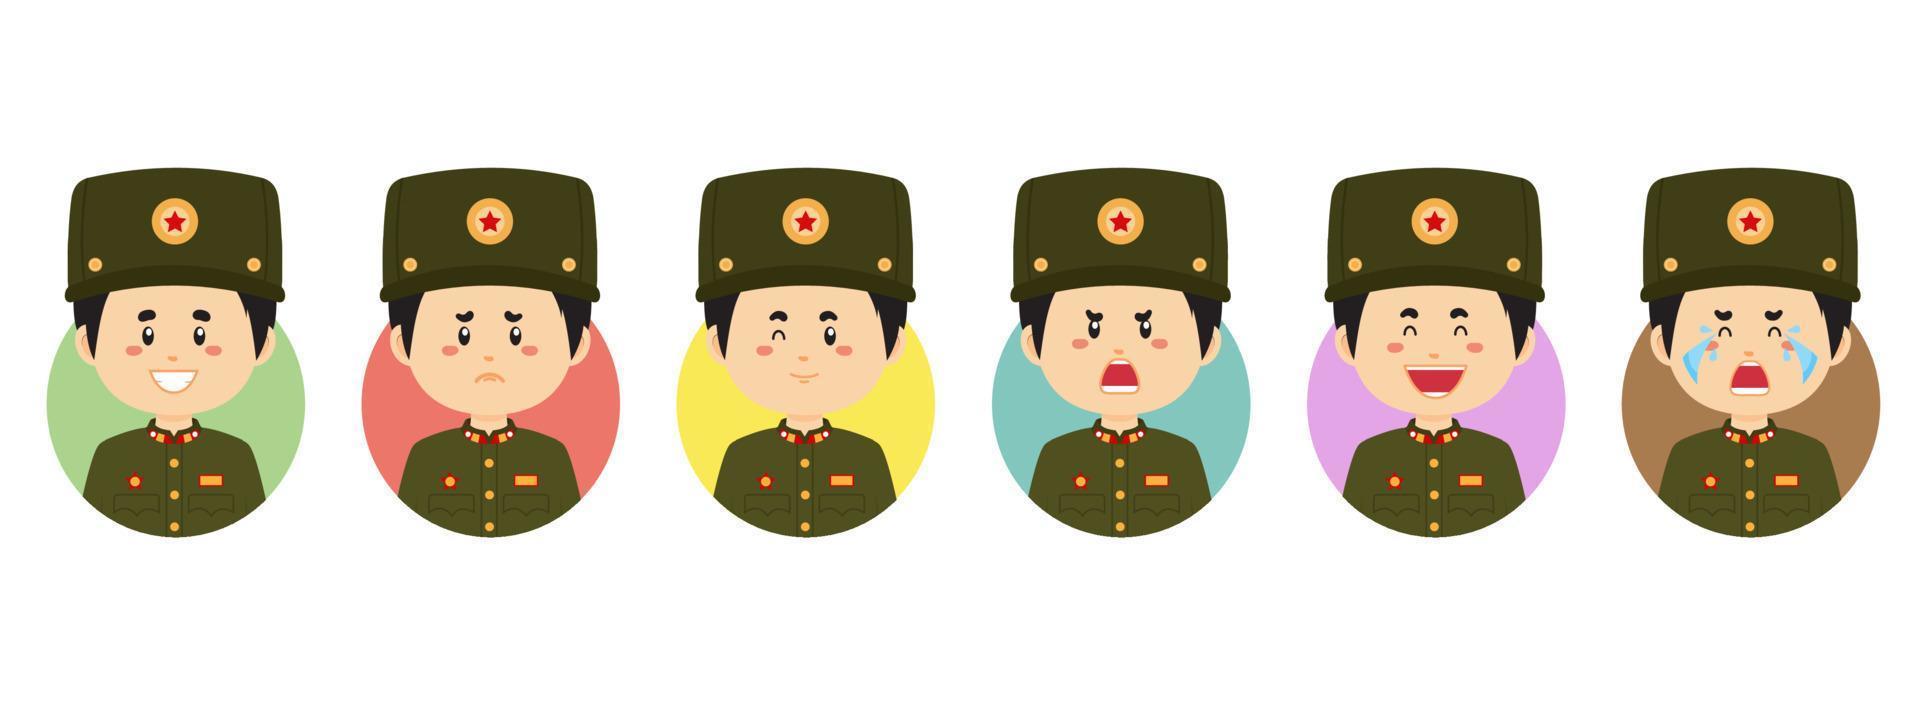 North Korea Avatar with Various Expression vector